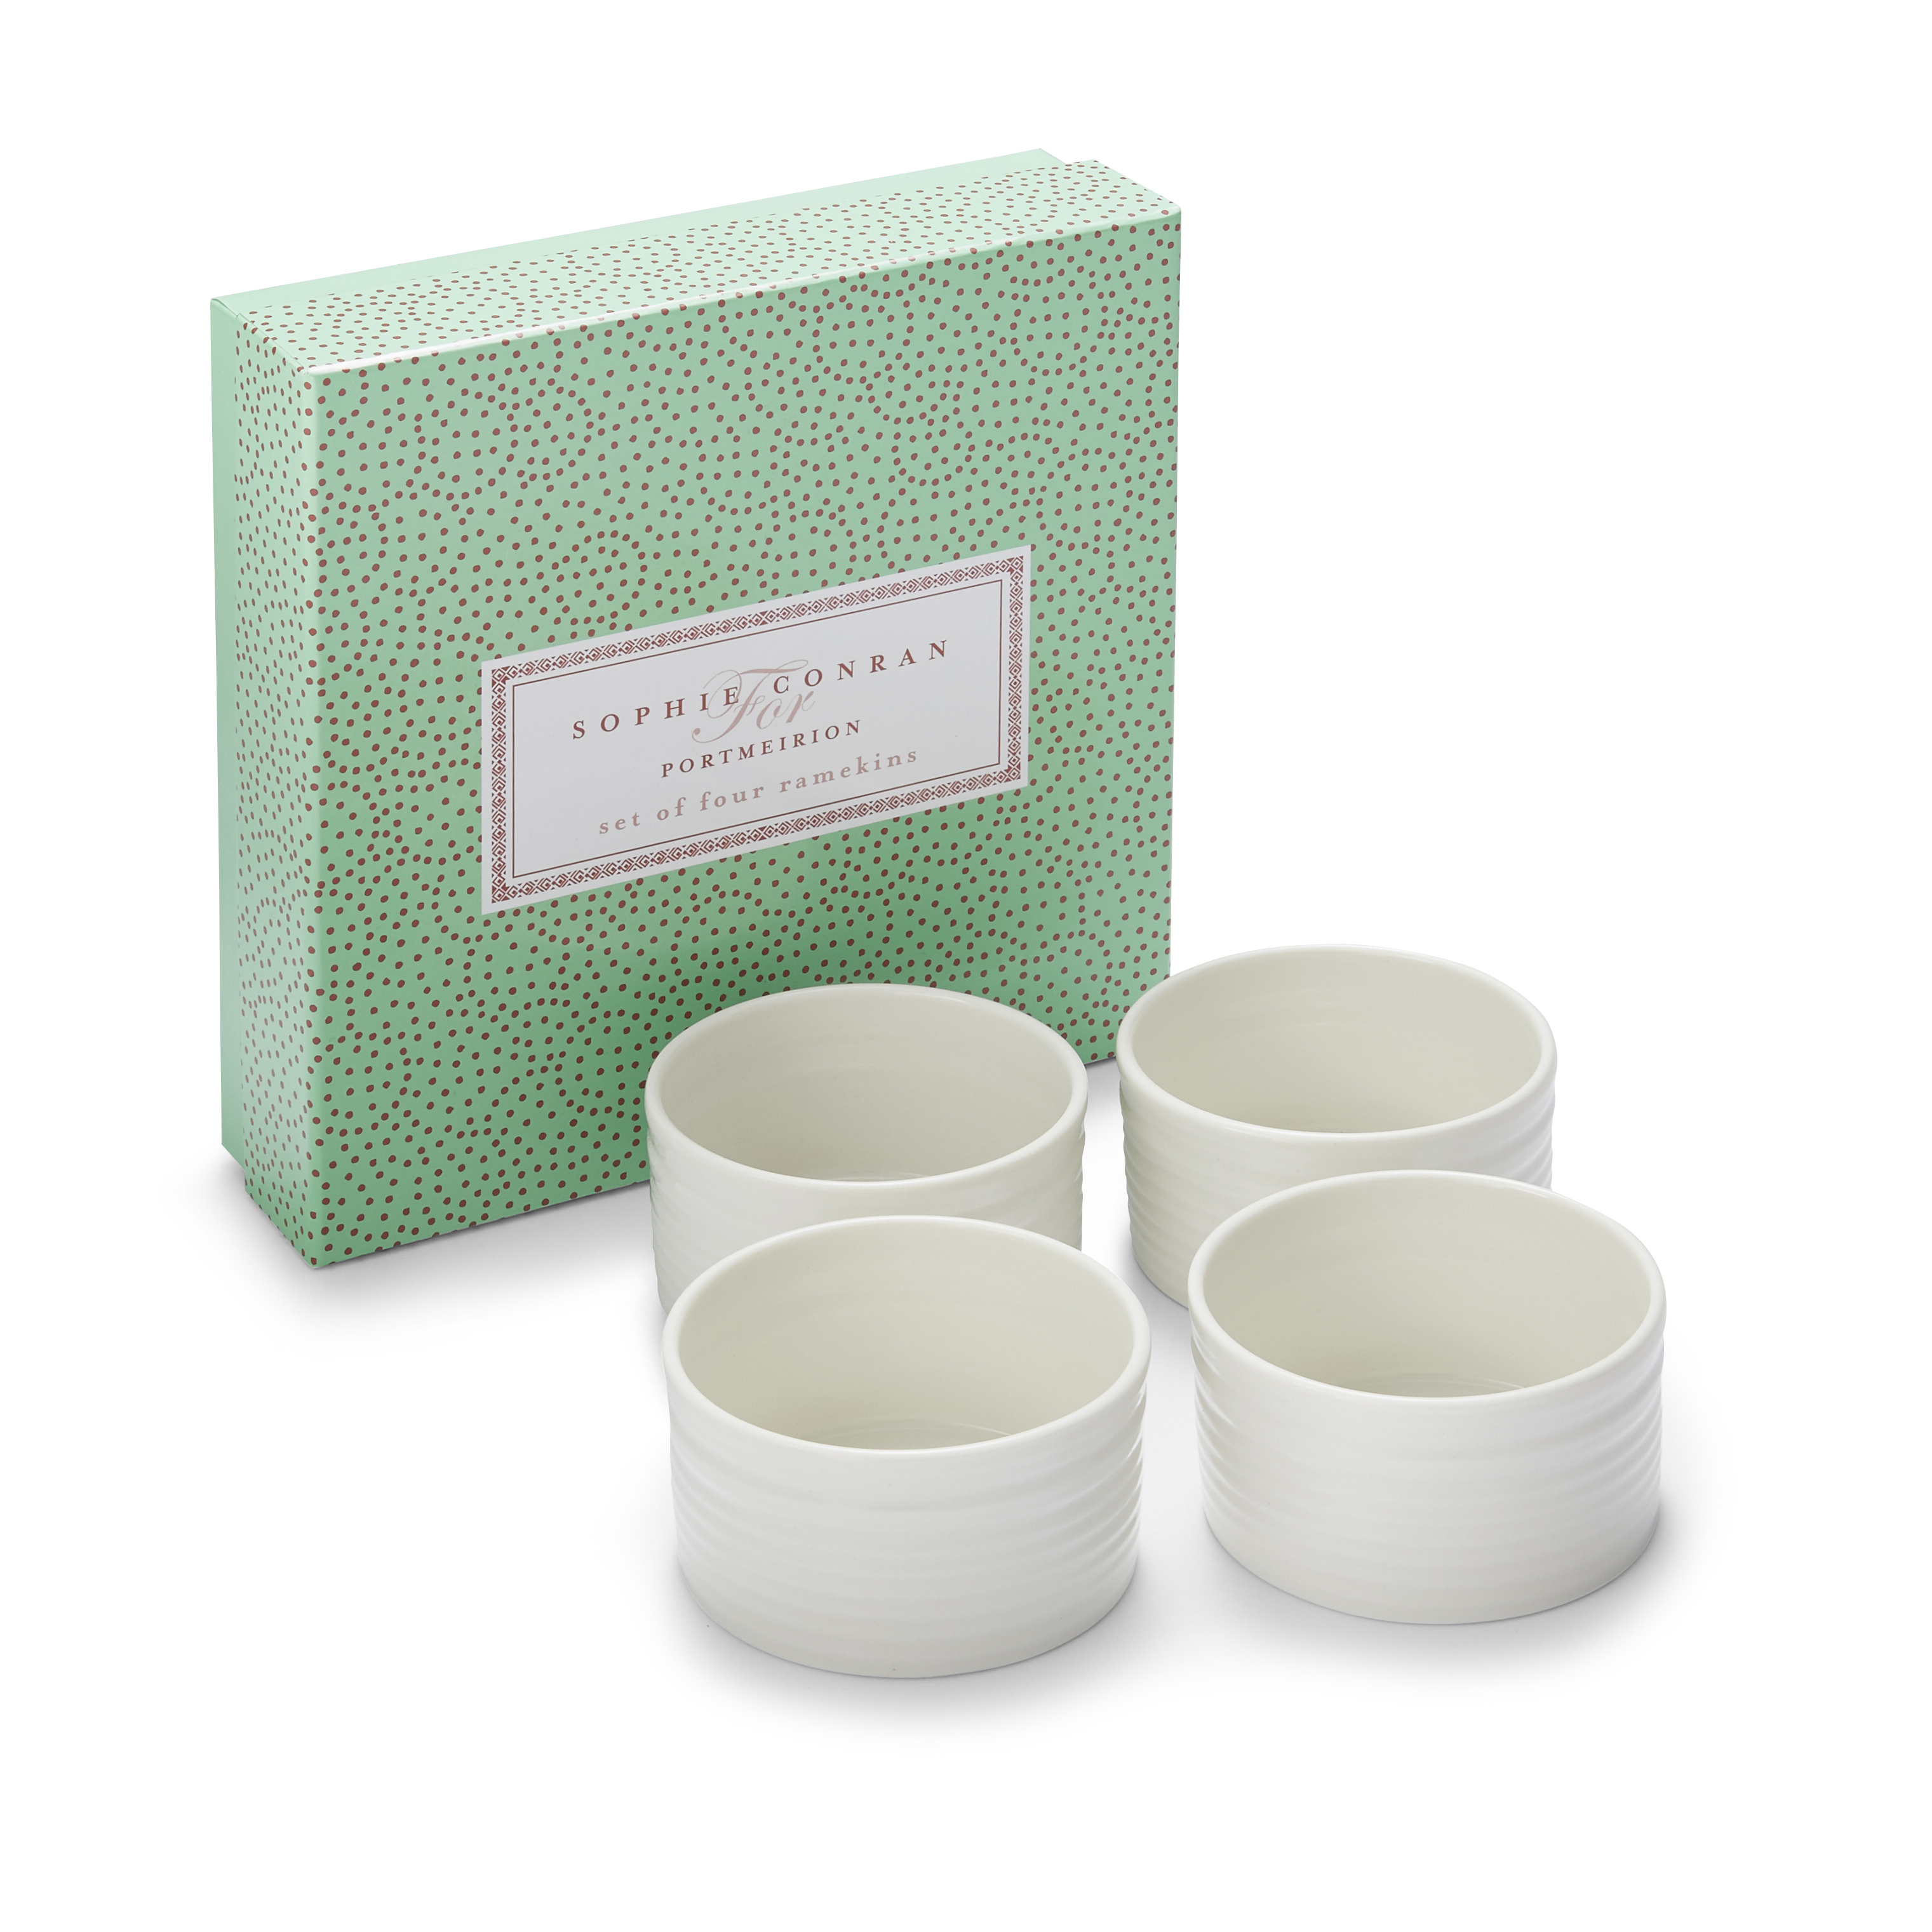 Sophie Conran Set of 4 Small Ramekins, White image number null